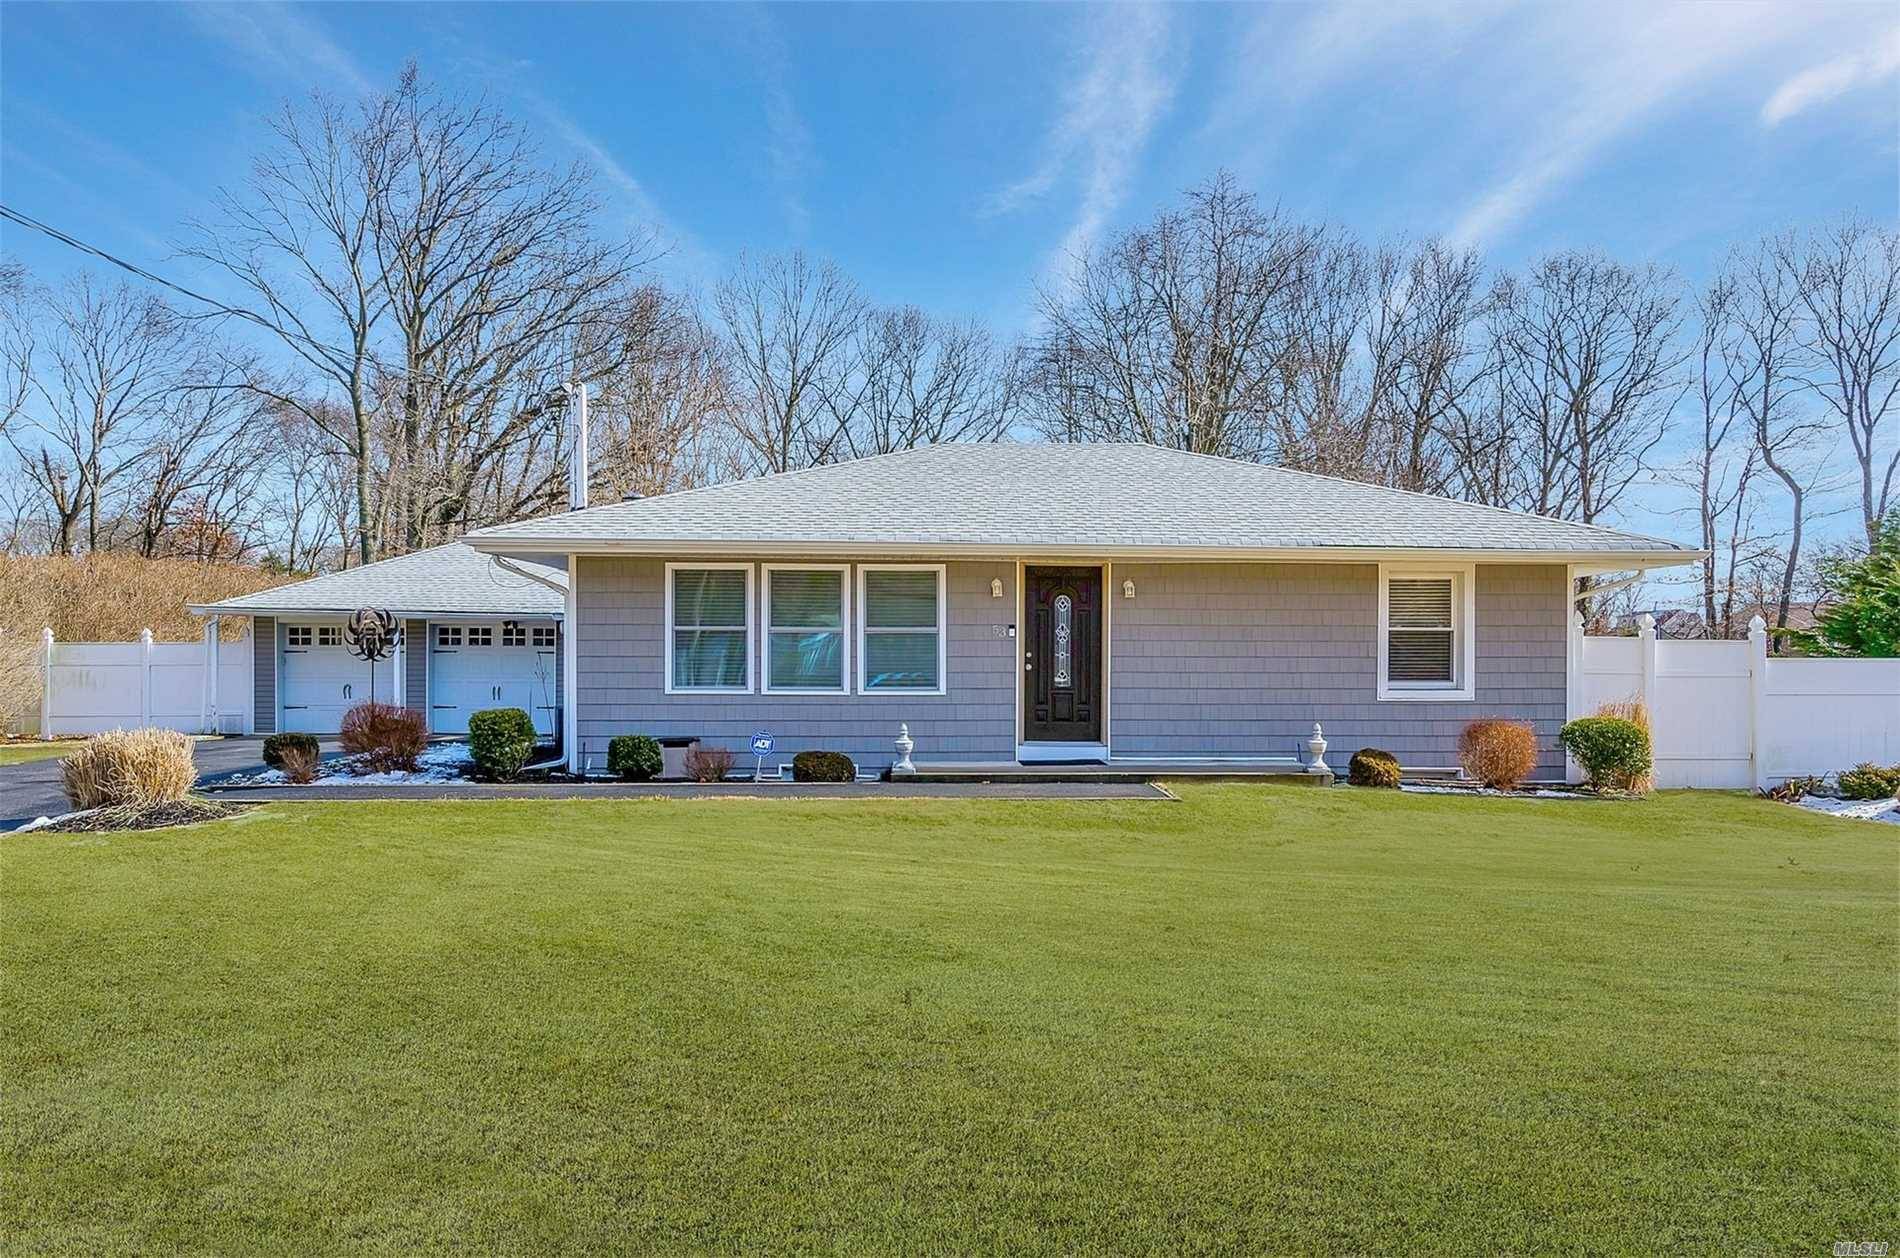 Magnificent Exp Ranch W Cedar Front Impression Siding 3 Year Young Roof Updated Windows 2 Car Detached Gar W Electric Long Expanded Blacktop Driveway Flat 1 2 Acre Lot Open ...